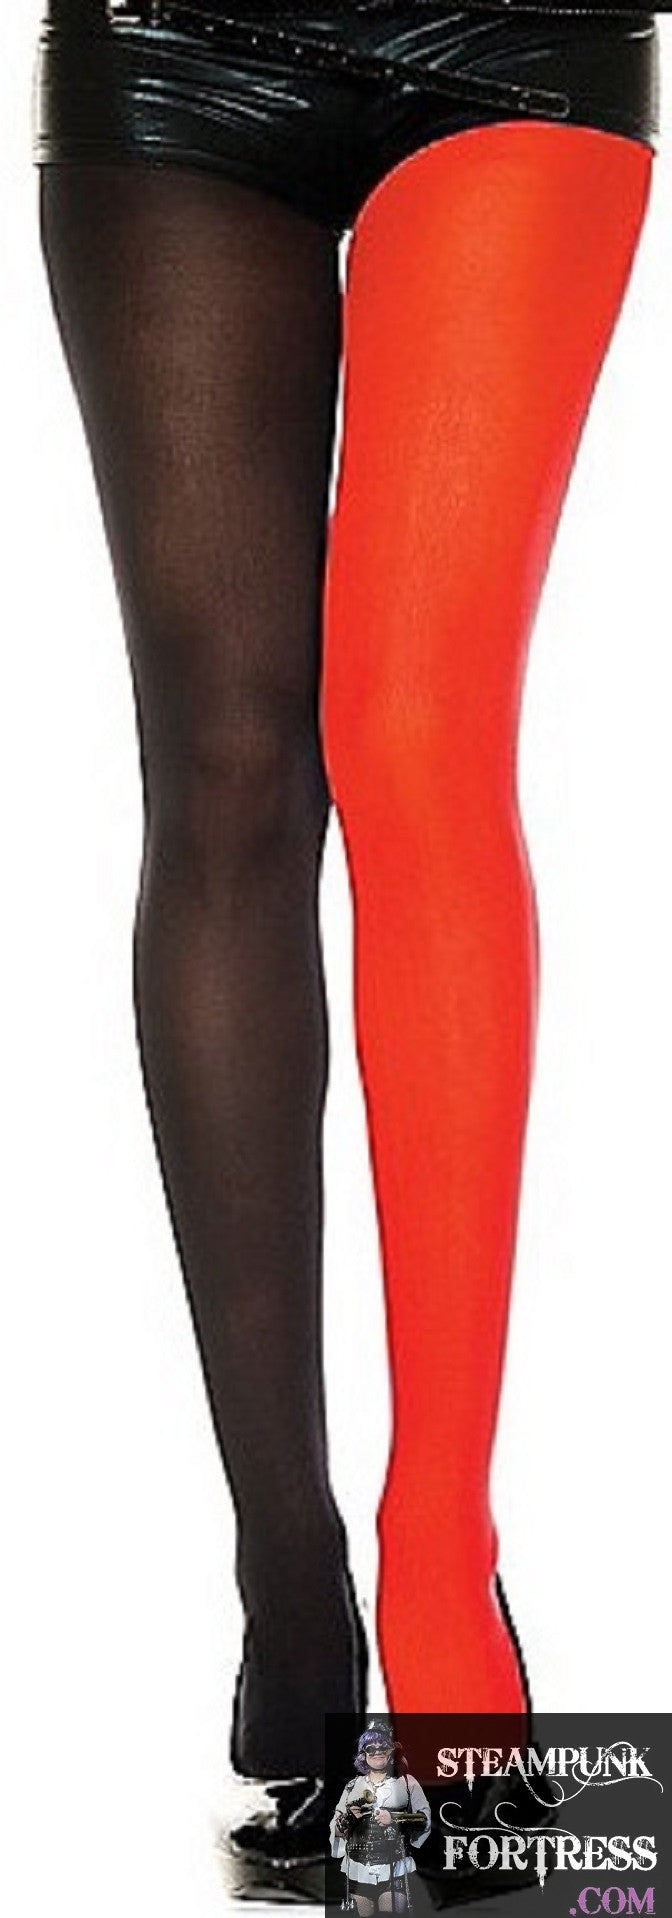 RED BLACK MISMATCH HARLEY QUINN SHEER MISMATCHED TIGHTS NYLONS HOSIERY PANTYHOSE STOCKINGS ONE SIZE FITS MOST HALLOWEEN COSPLAY COSTUME - NEW - MASS PRODUCED